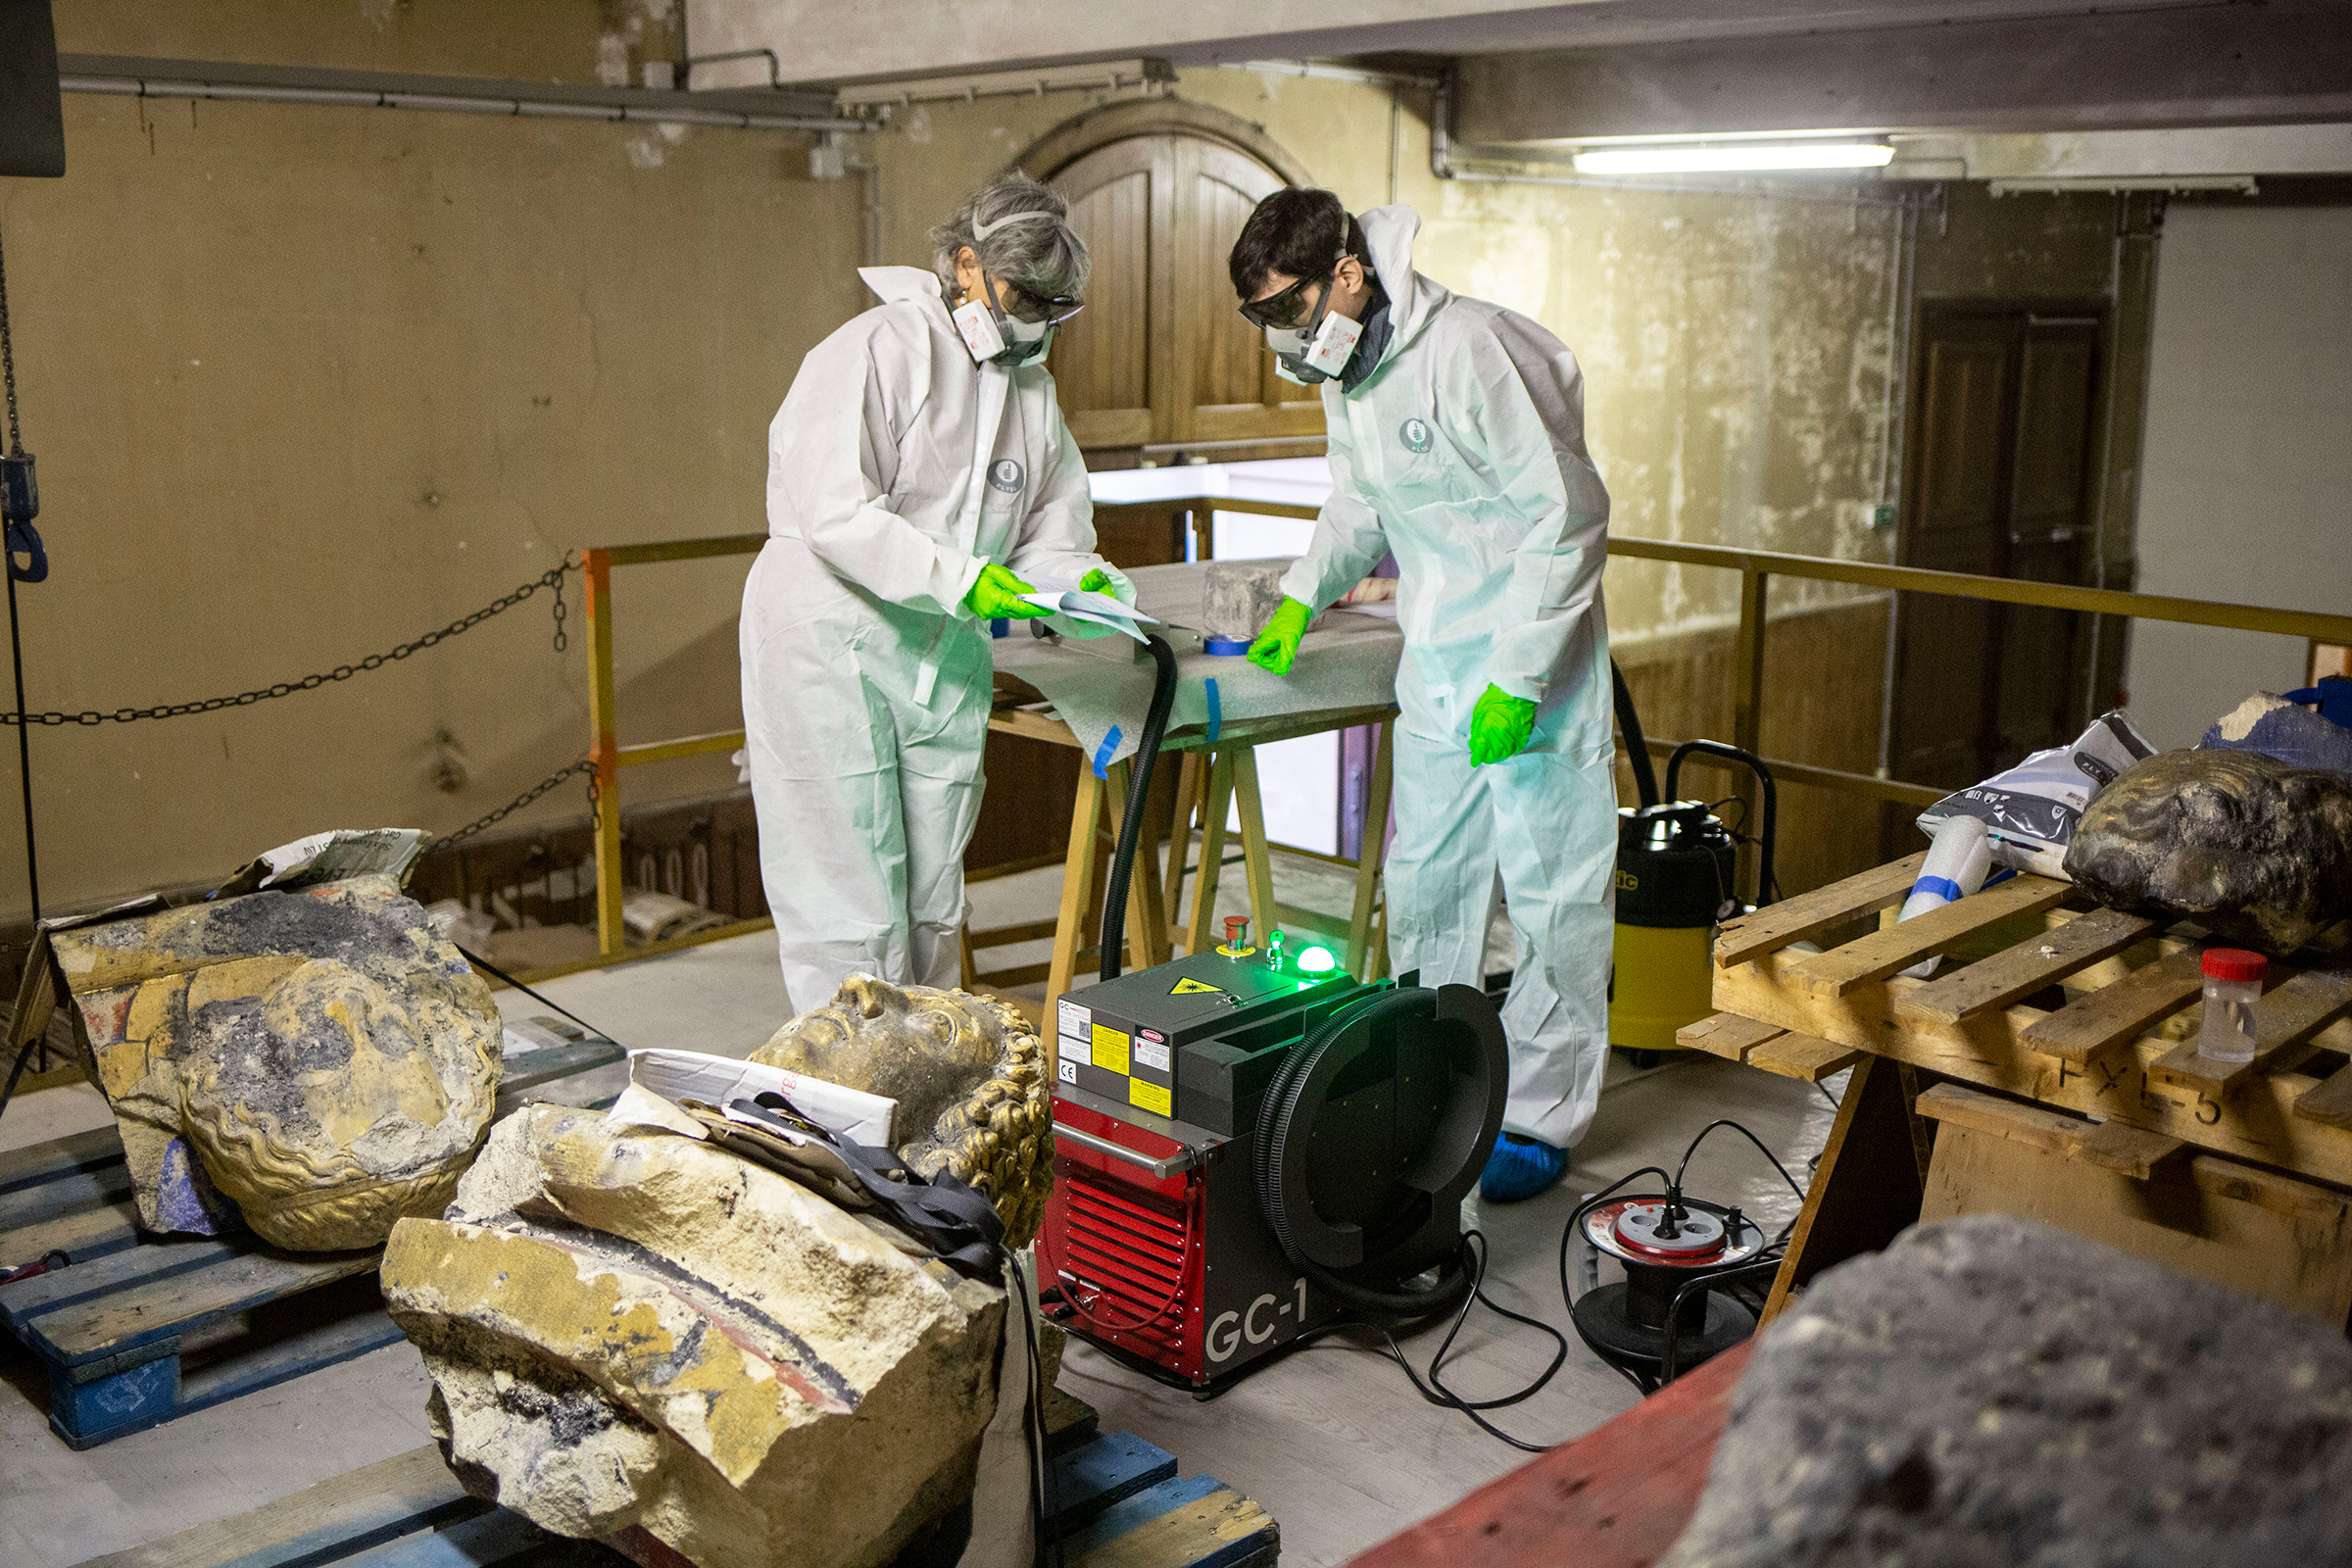 Véronique Vergès-Belnin and Jérémy Henin, surrounded by various busts and stones from the cathedral, at work in the national monuments research laboratory in October.